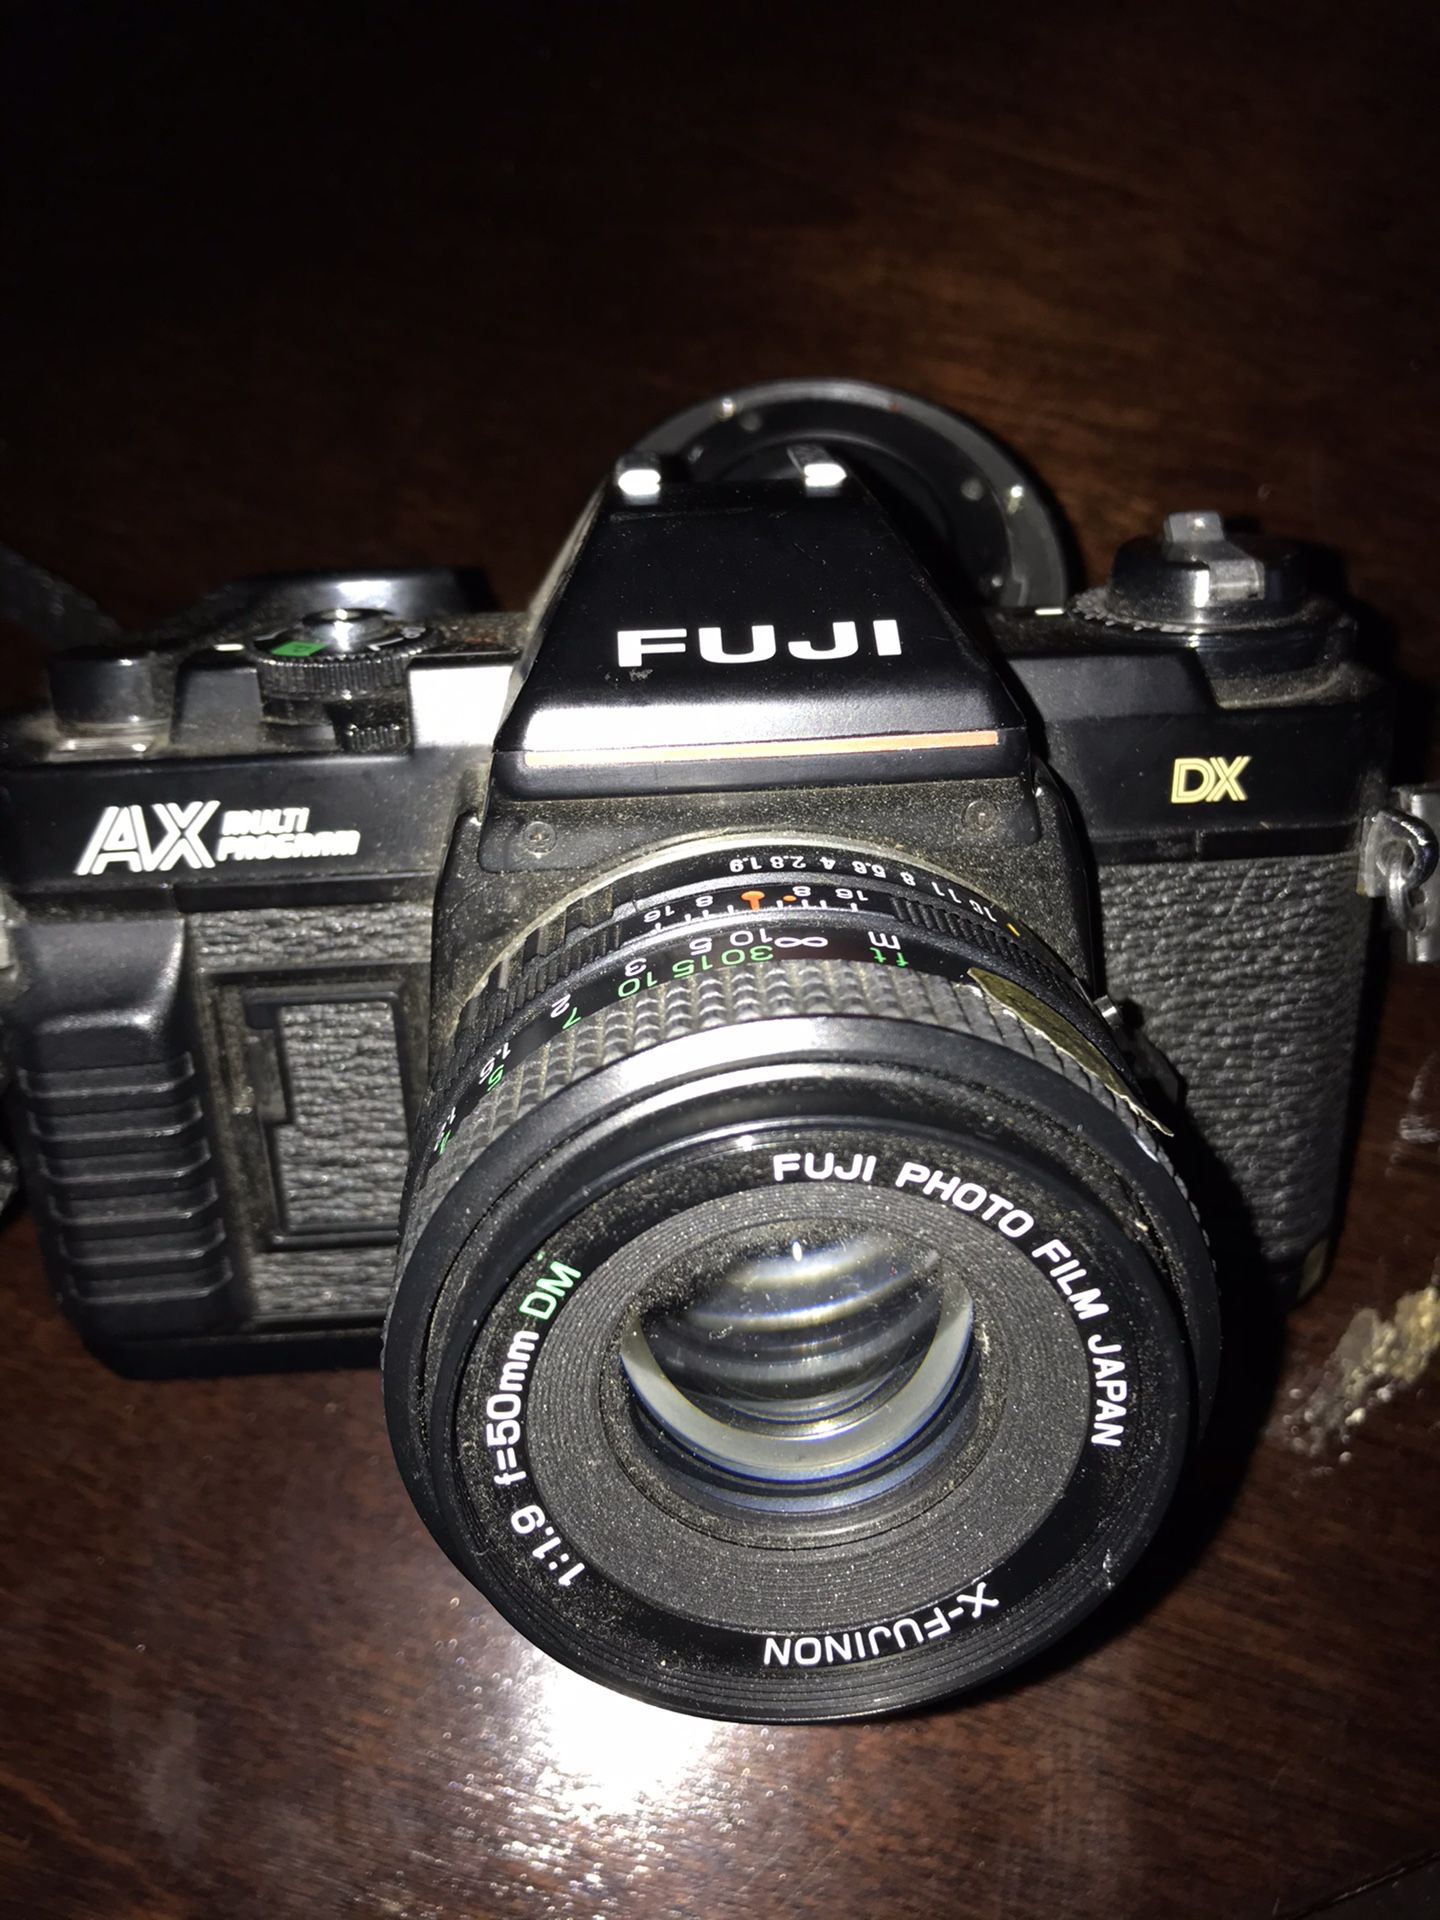 Fuji DX with Lens 50